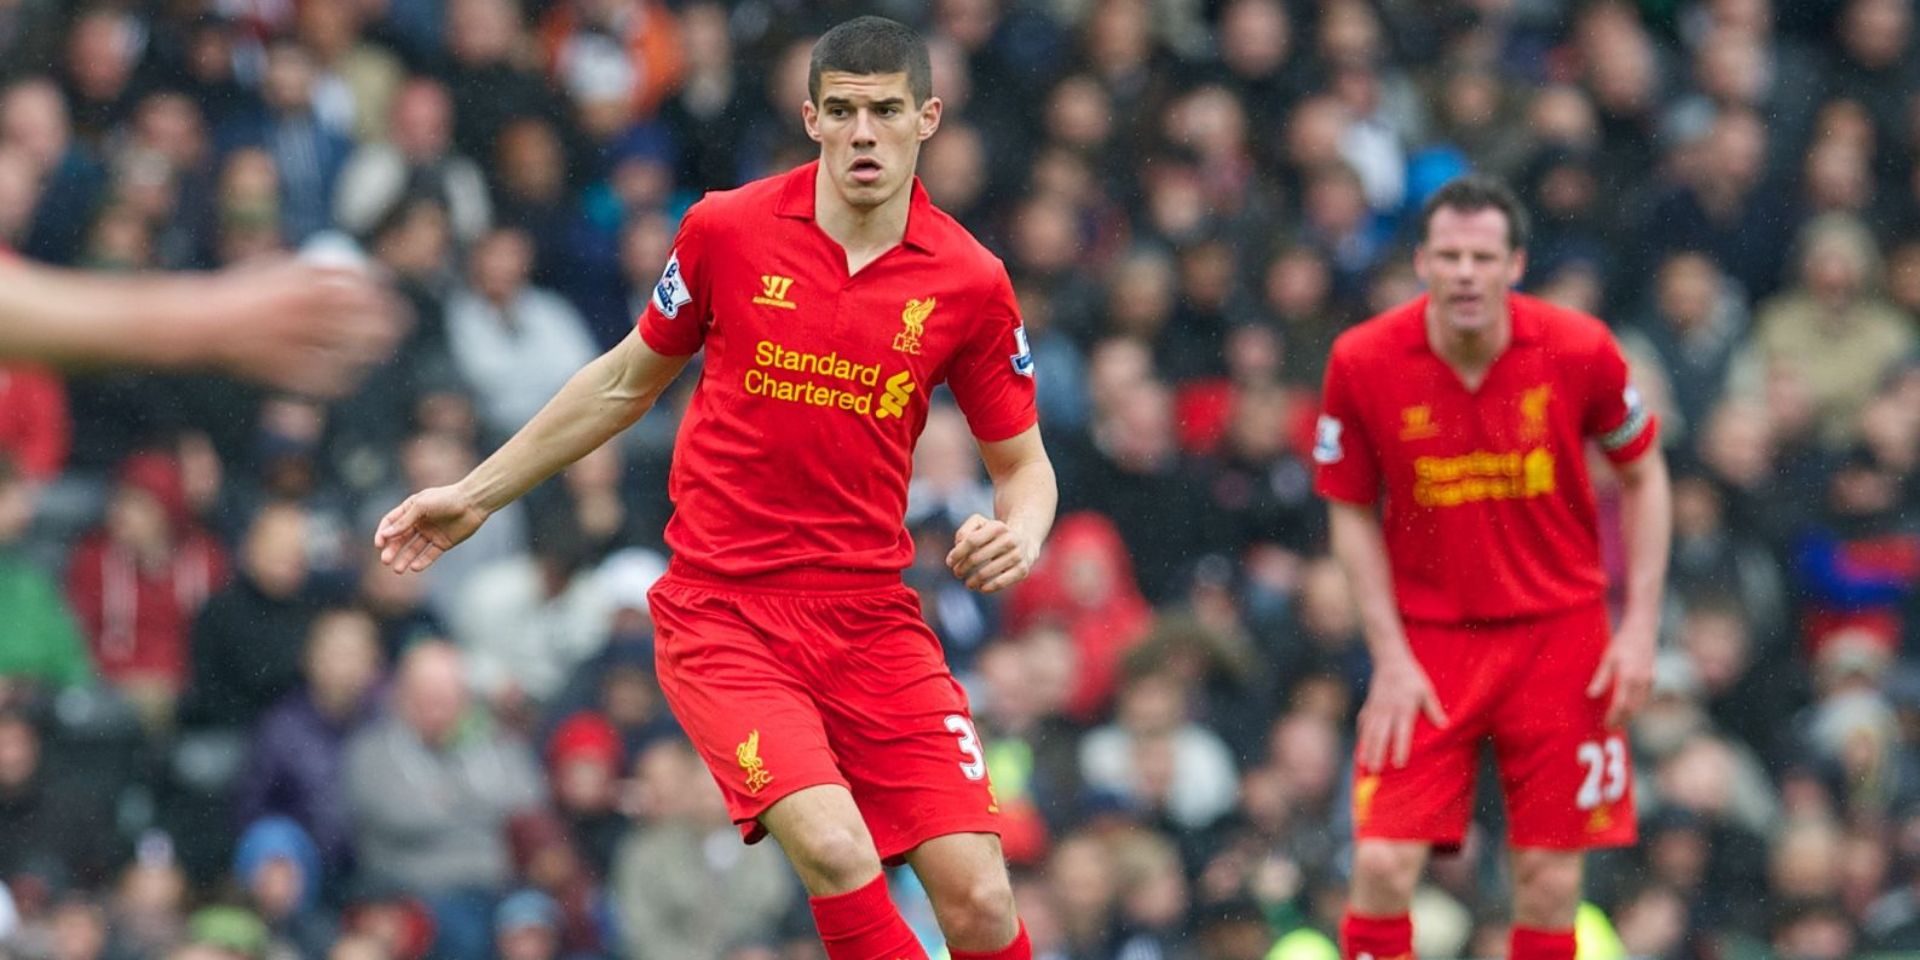 Jamie Carragher’s one-word response to boyhood Liverpool fan Conor Coady’s decision to sign for Everton